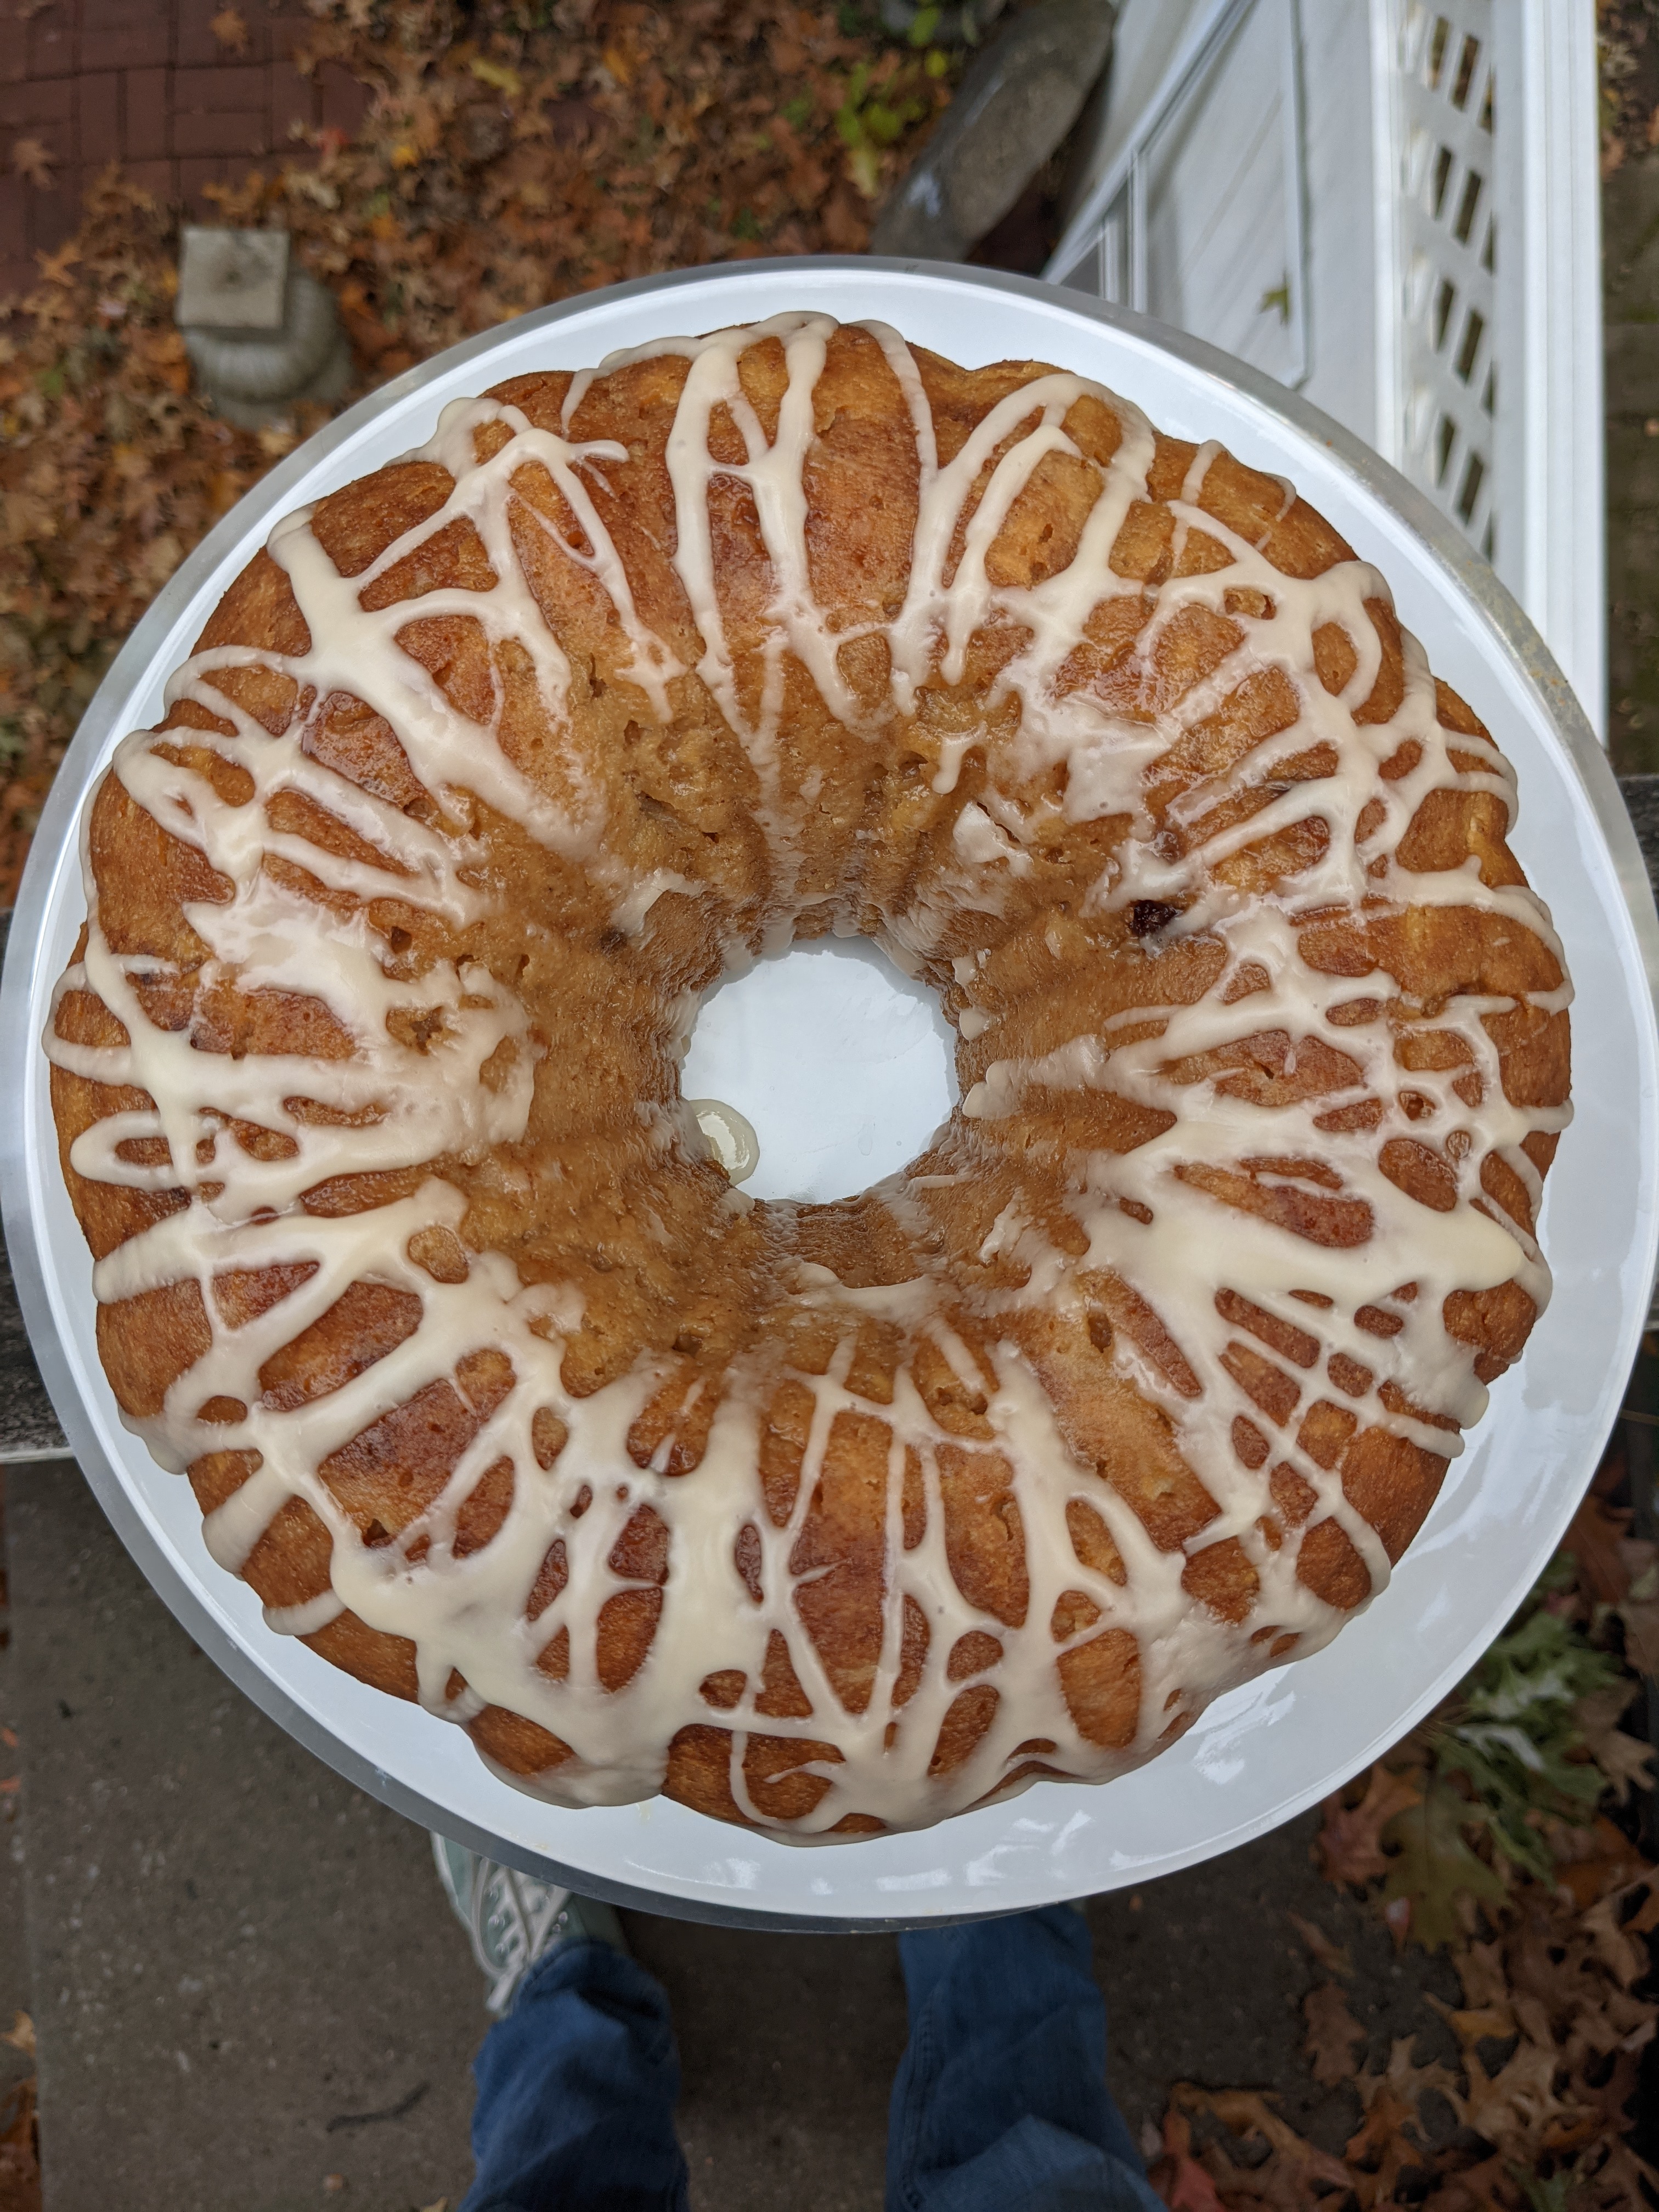 An apple bundt cake with a drizzle of white icing